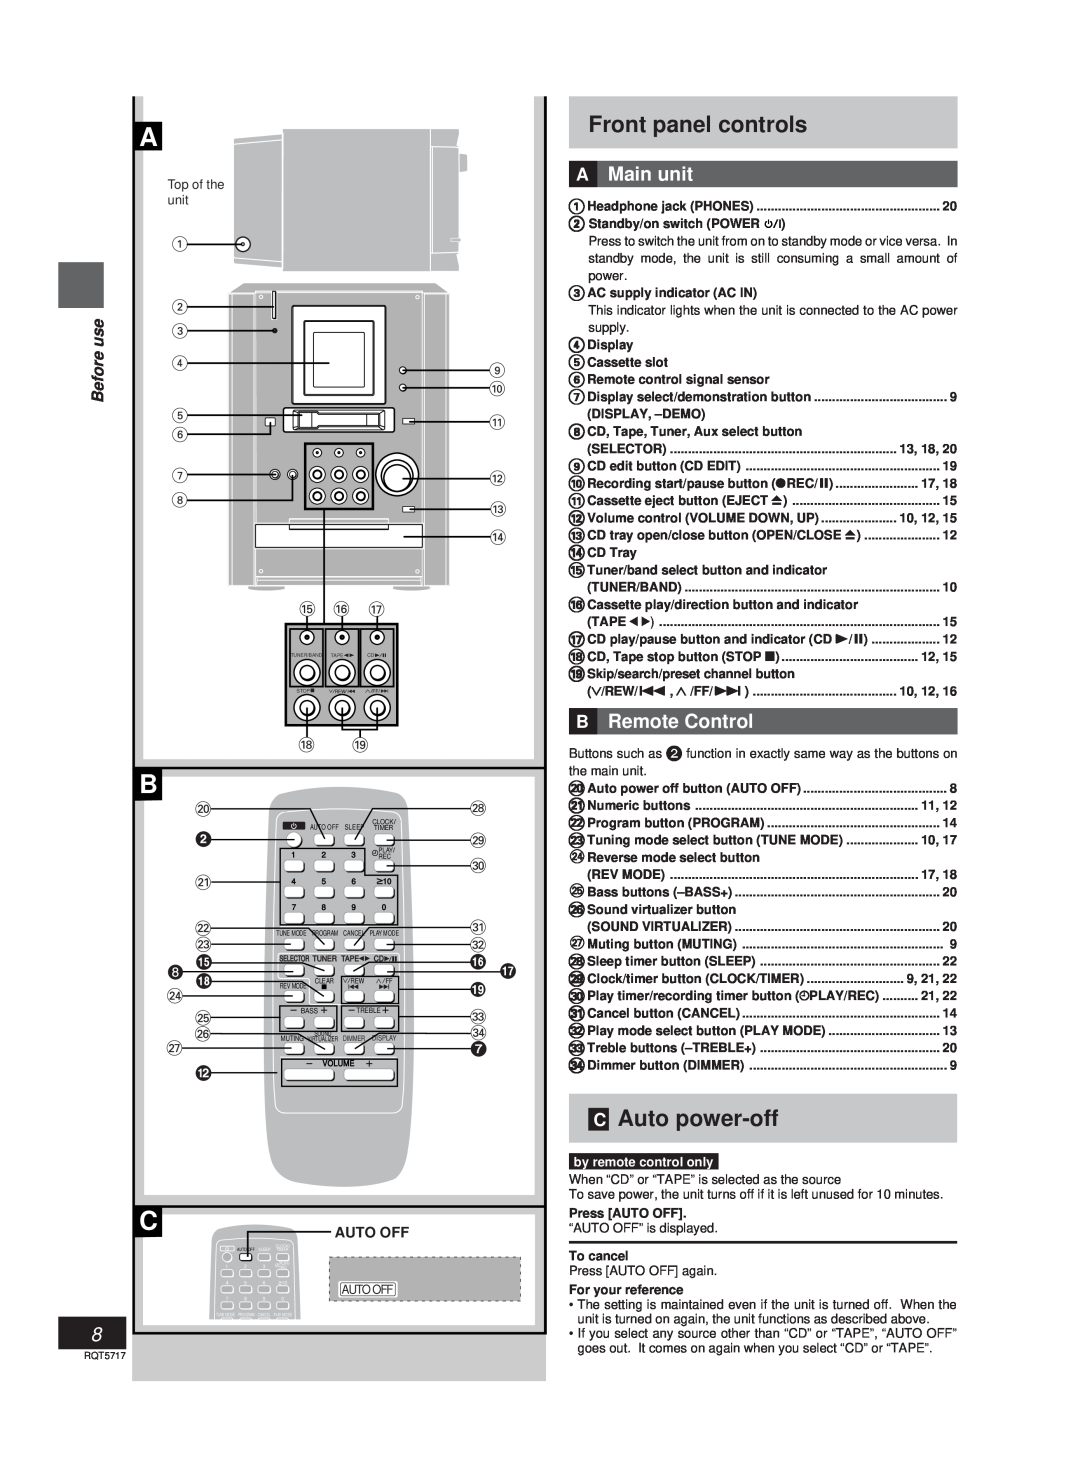 Panasonic SC-PM25 Front panel controls, CAuto power-off, AMain unit, BRemote Control, Auto Off, Standby/on switch POWER 